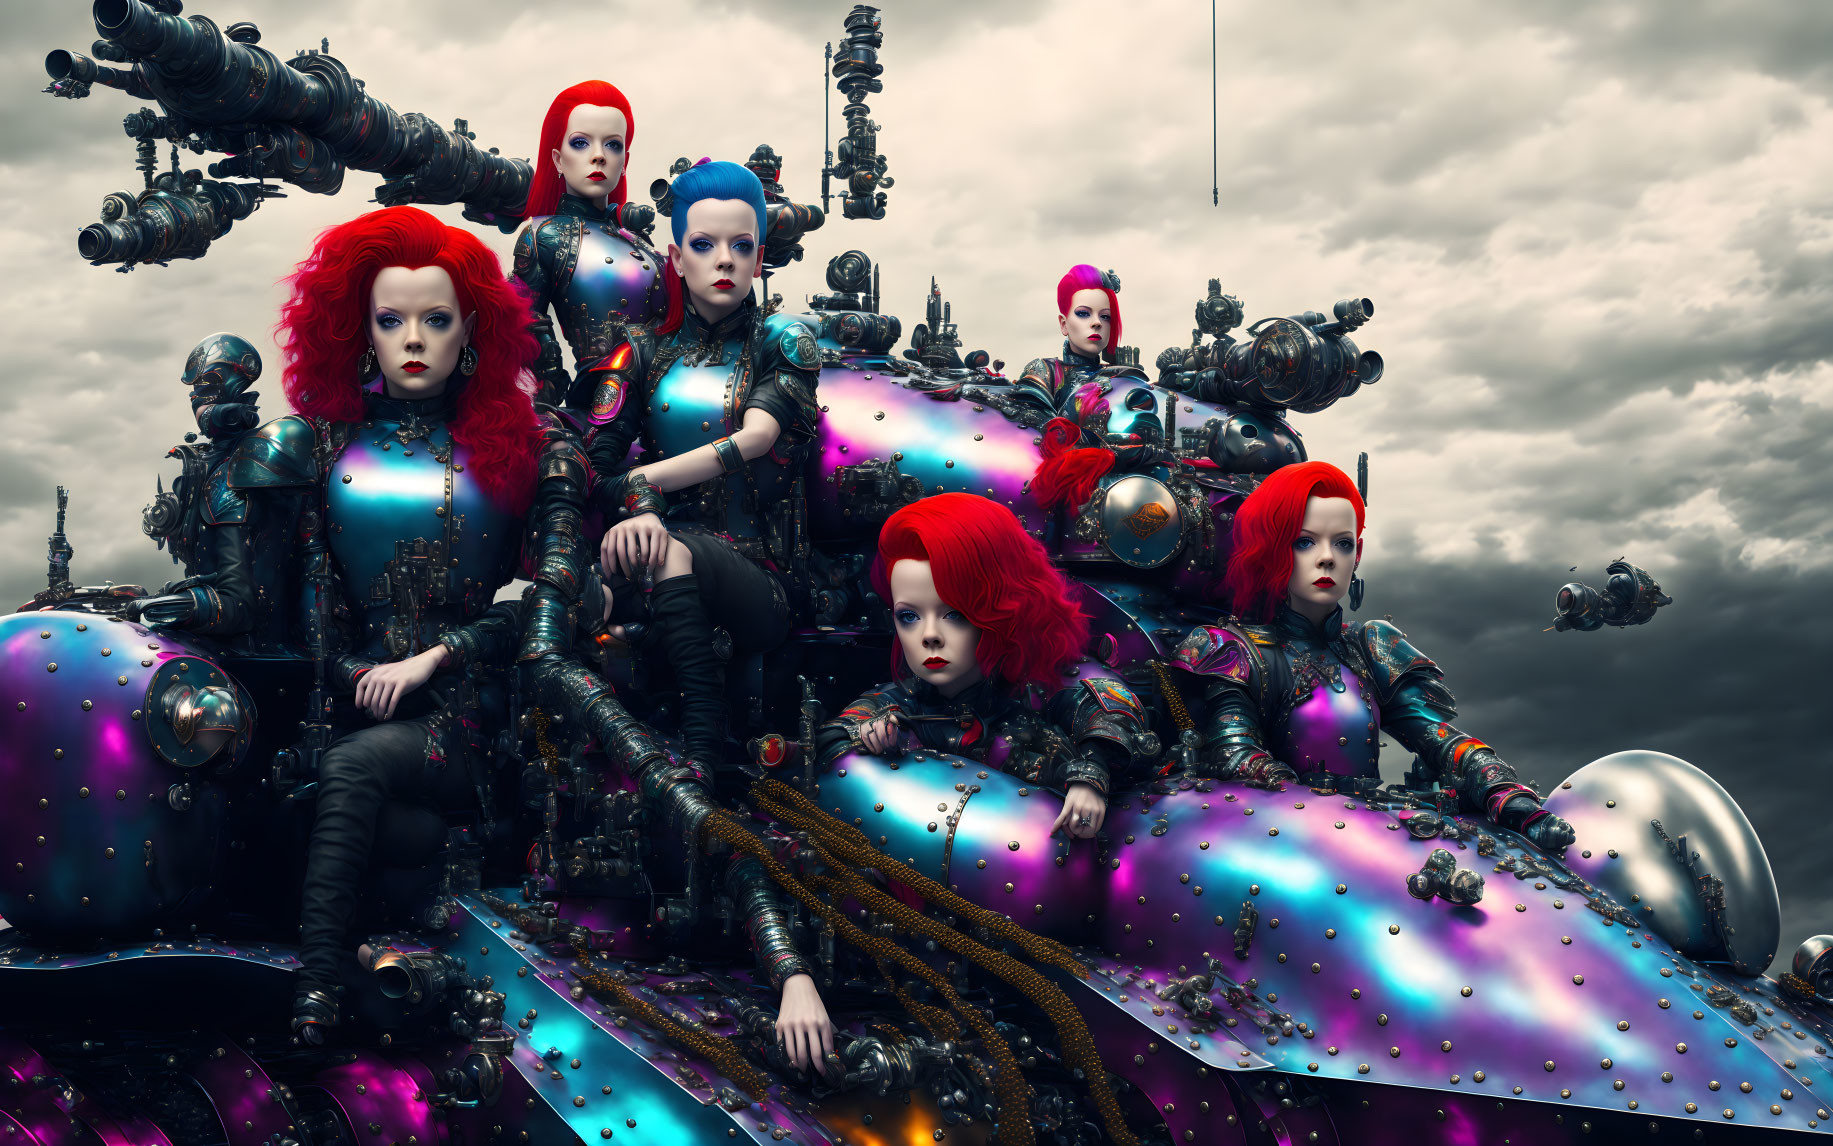 Futuristic female cyborgs with red hair and machinery under stormy sky